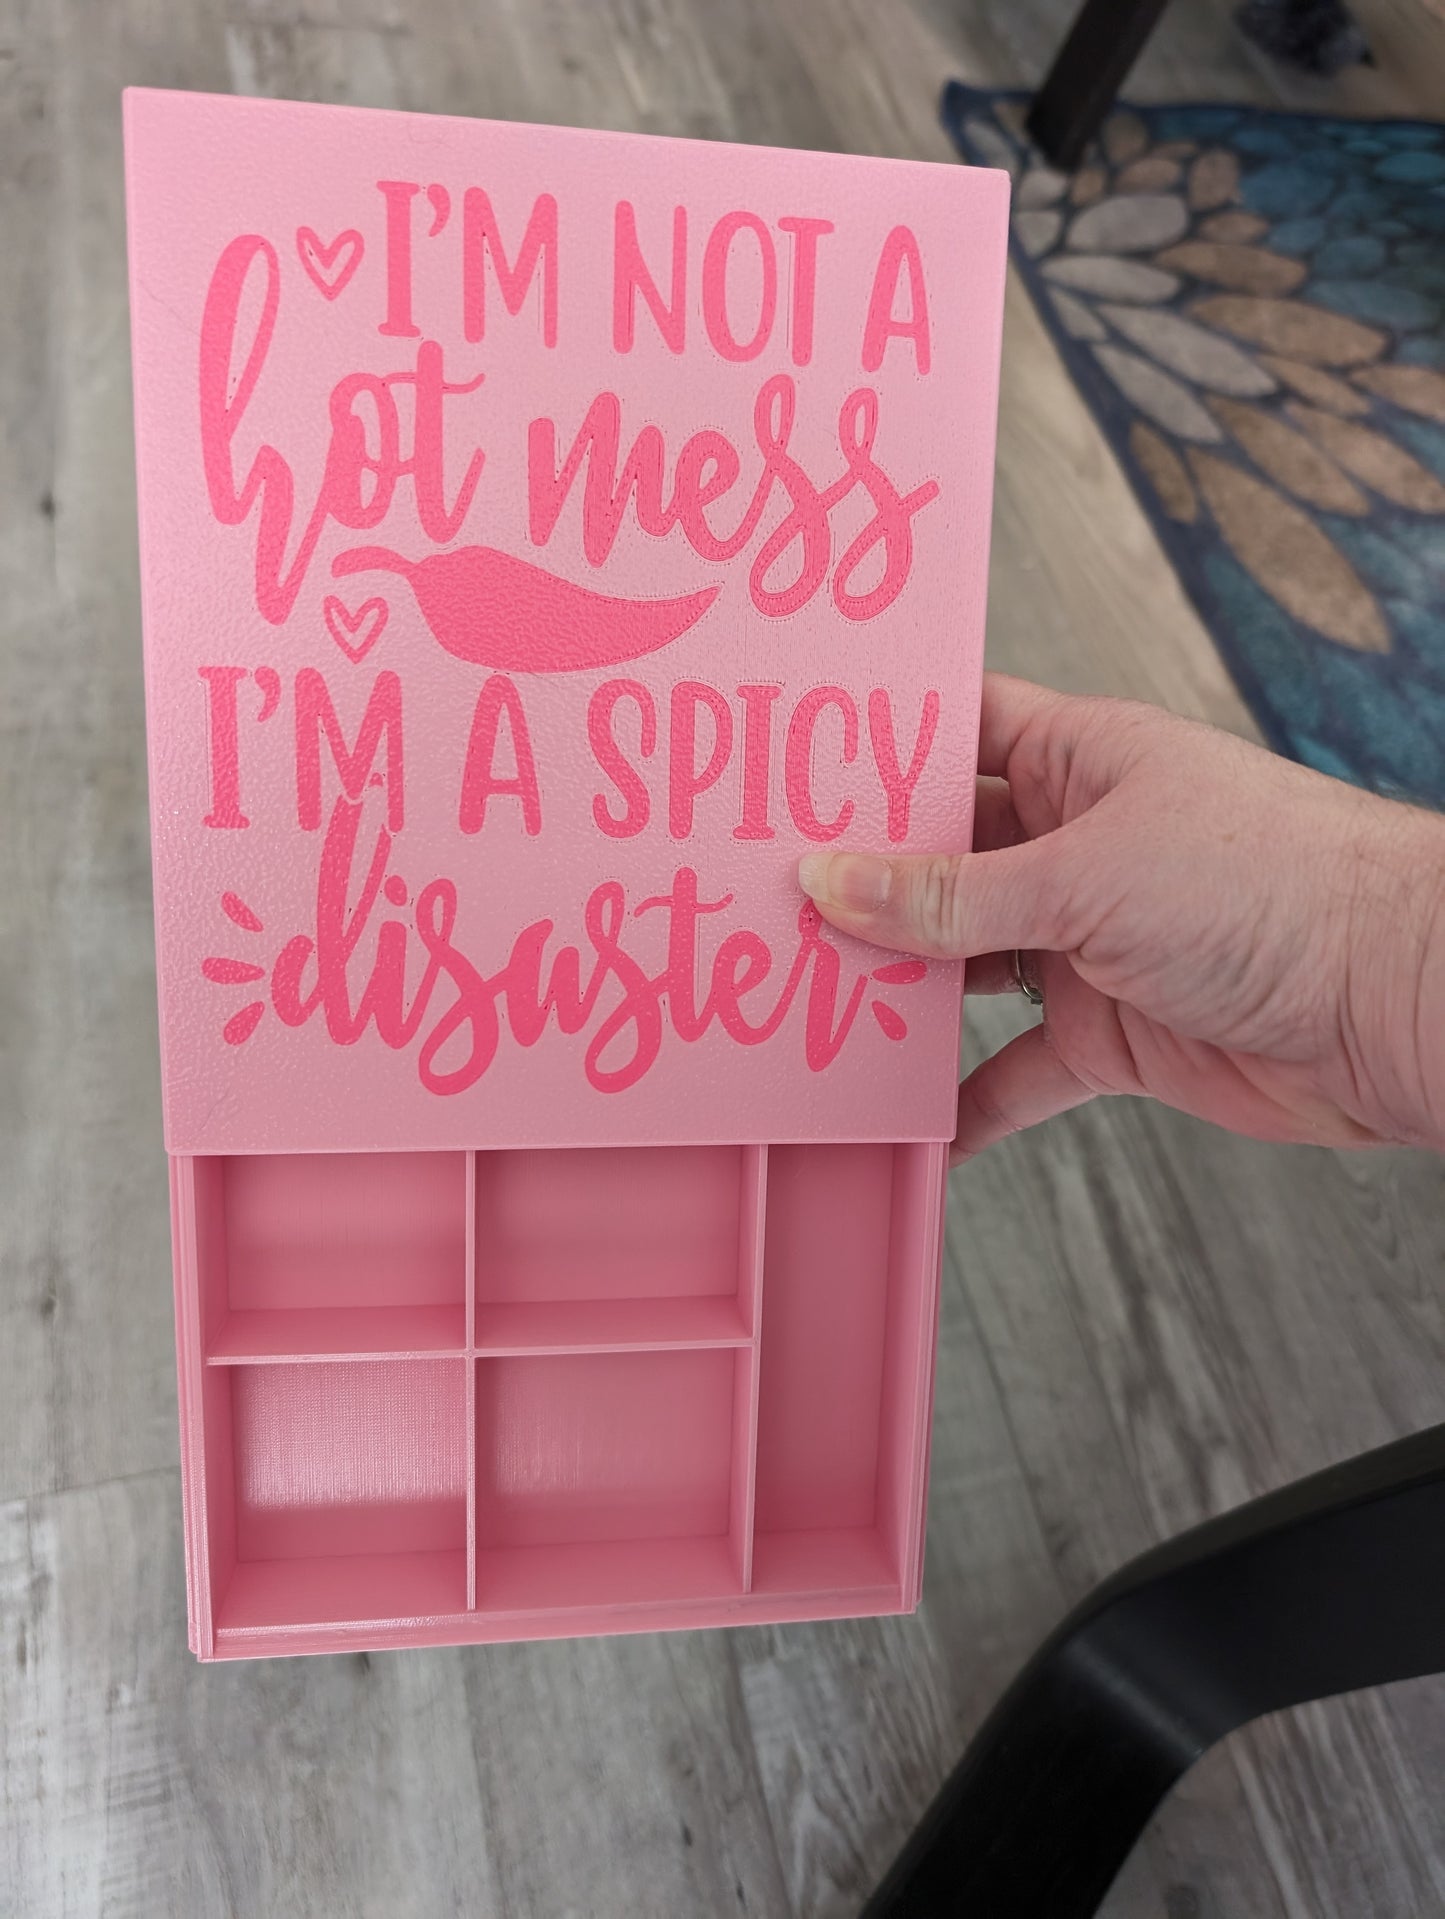 3D printed Notions Box--Spicy Disaster